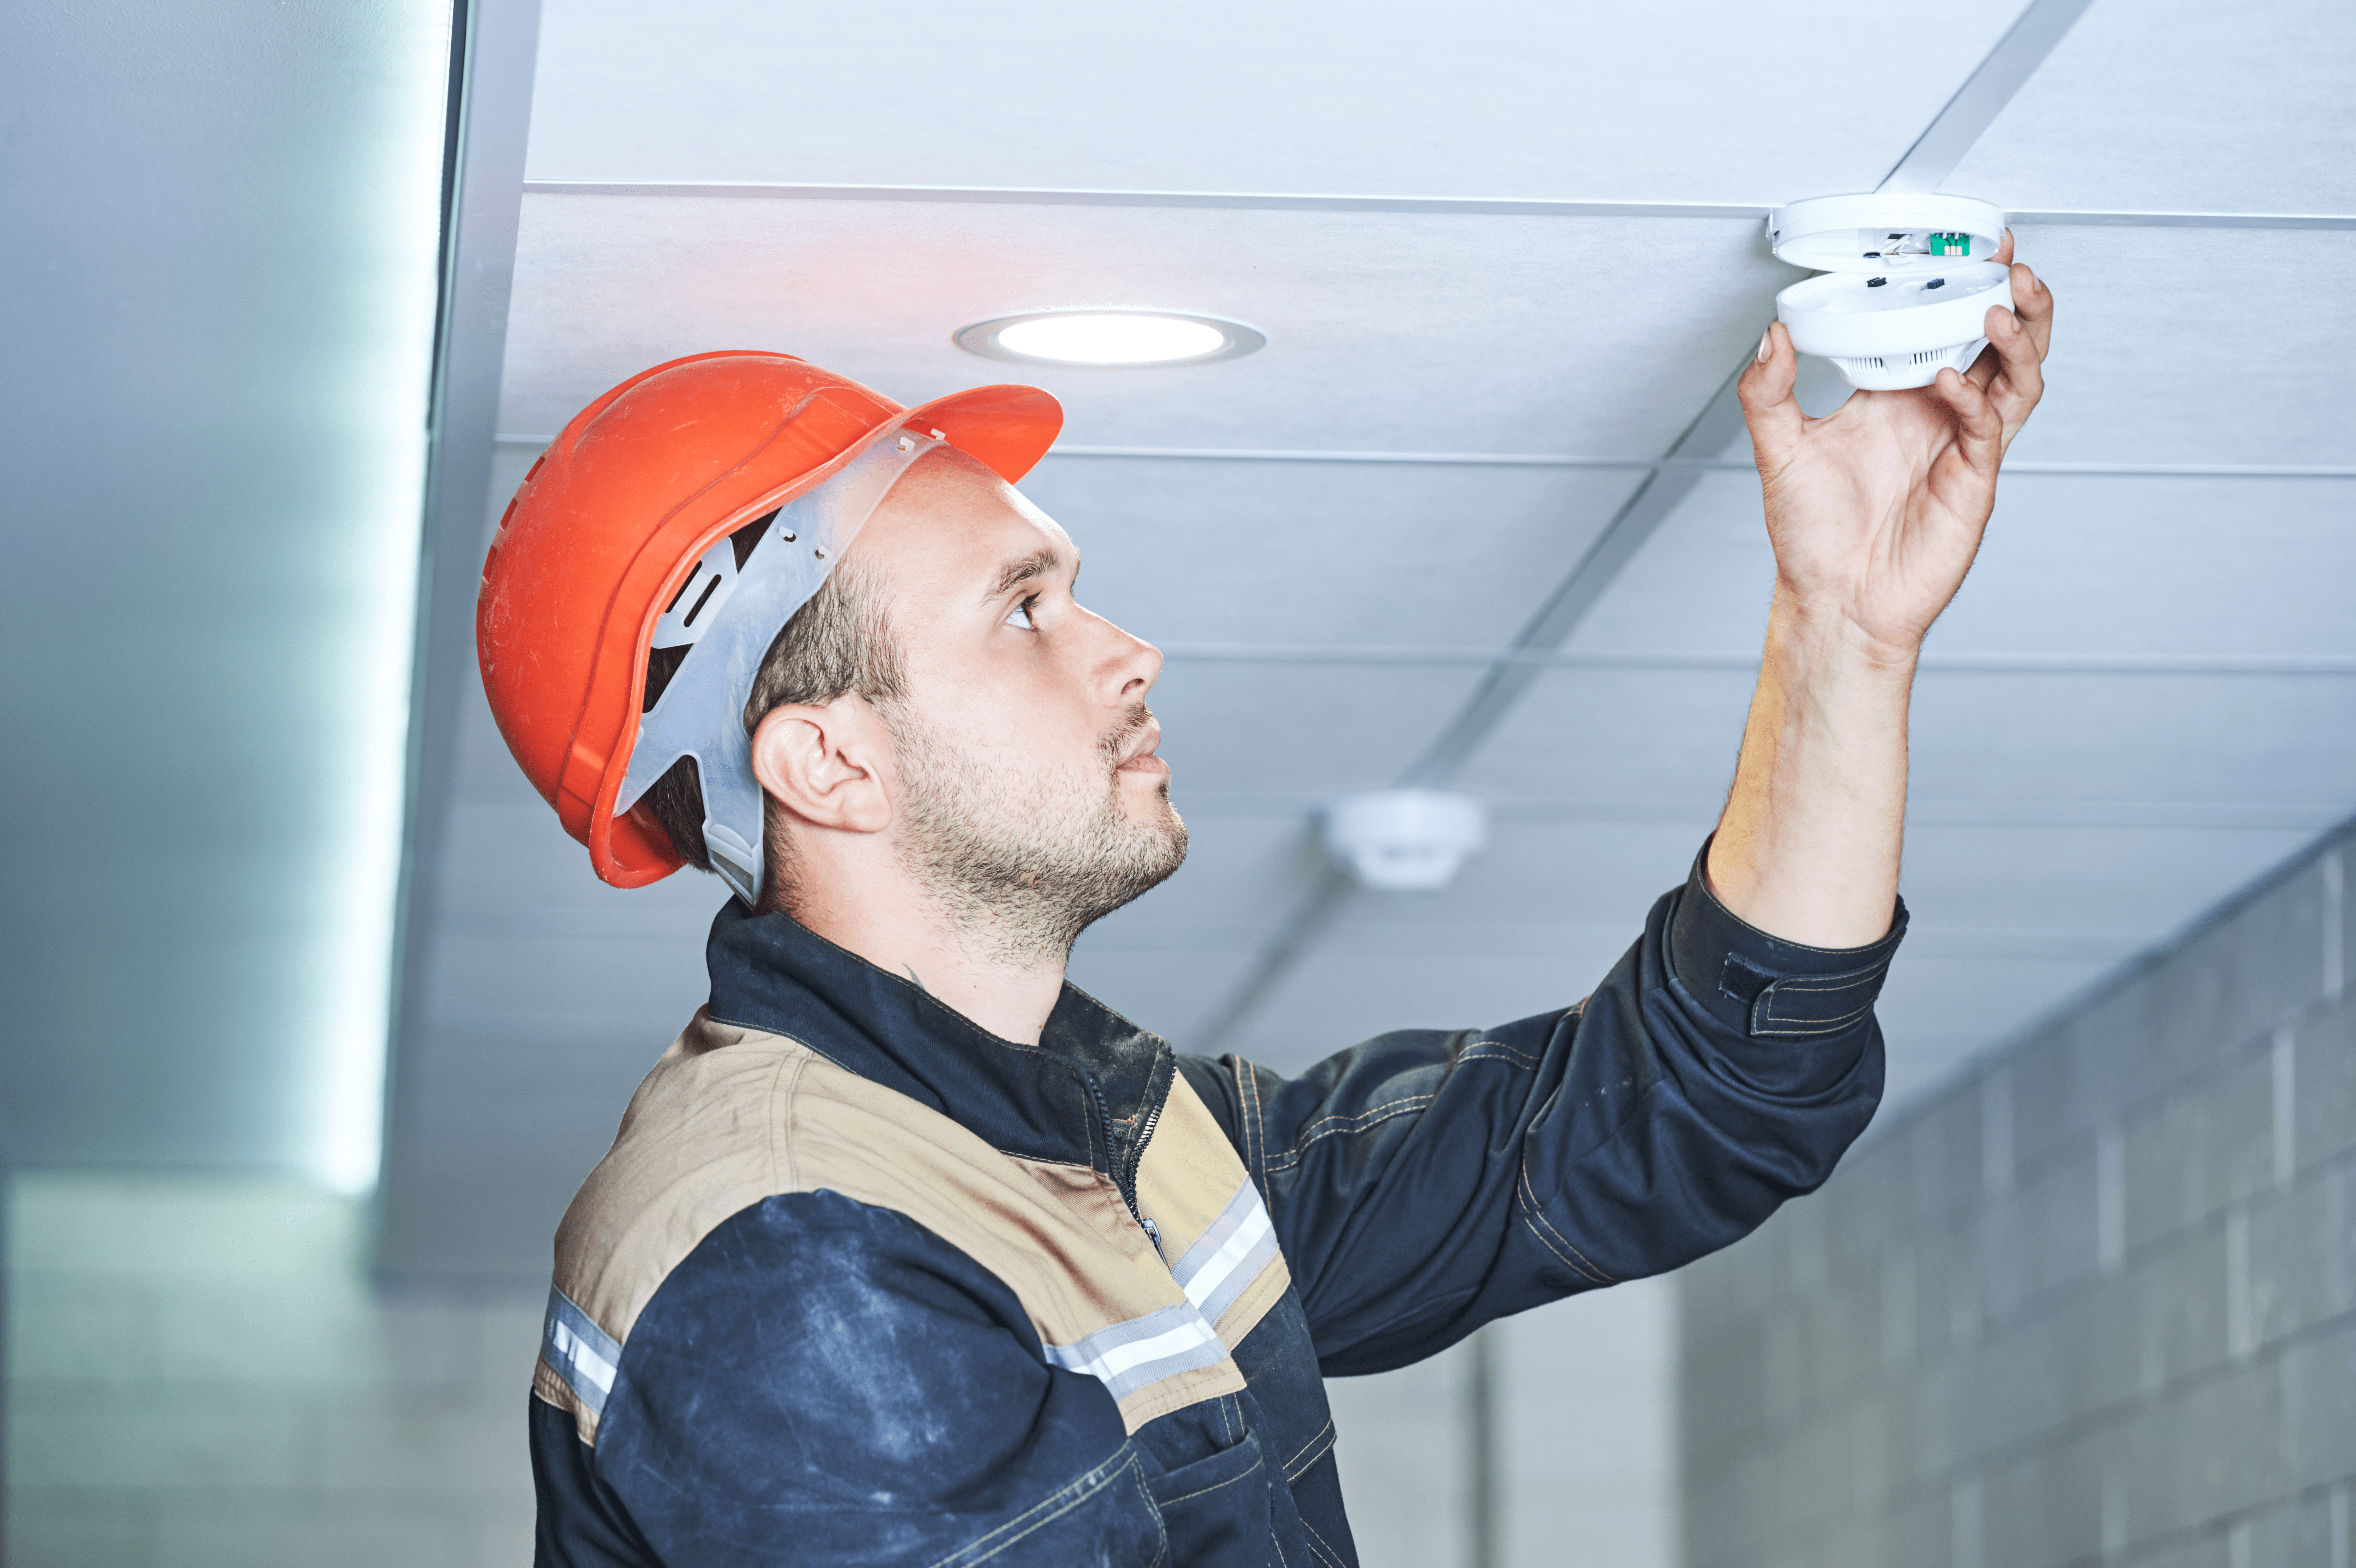 A man reaching up toward a fire alarm which is hanging loose, he has a hard hat and vest on and is looking at it while installing it.